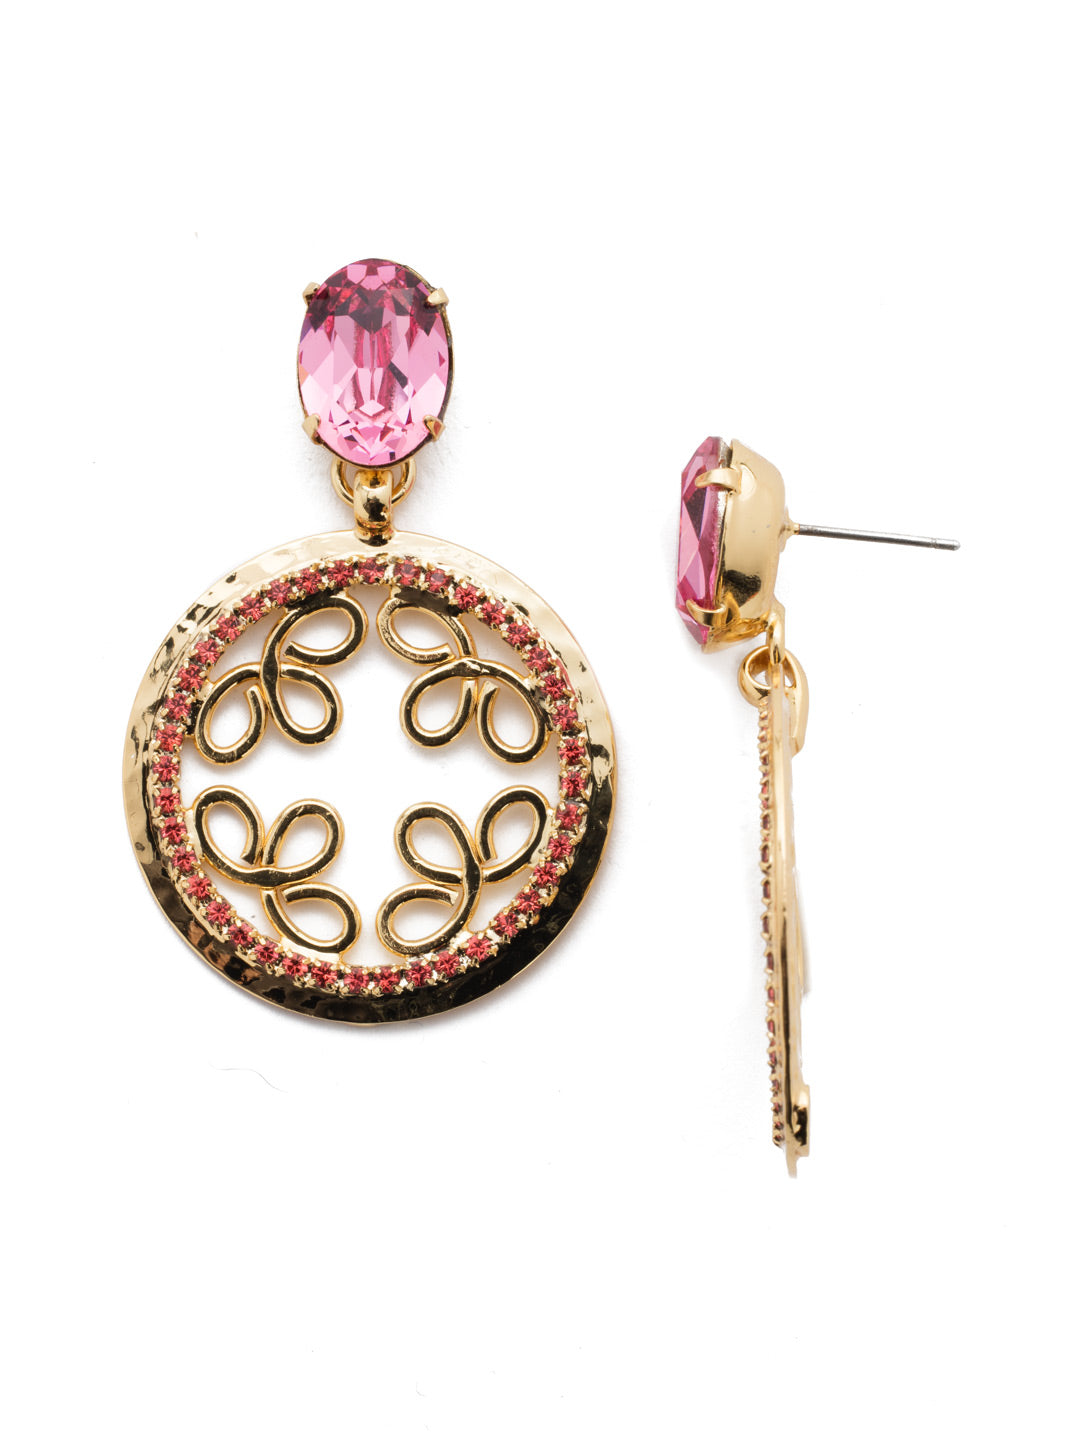 Tallulah Statement Earring - EES2BGBGA - The Tallulah Dangle Earrings are showstoppers. A dominant cushion crystal has some serious competition from the hand-soldered metalwork rimmed in bright sparkling stones. From Sorrelli's Begonia collection in our Bright Gold-tone finish.